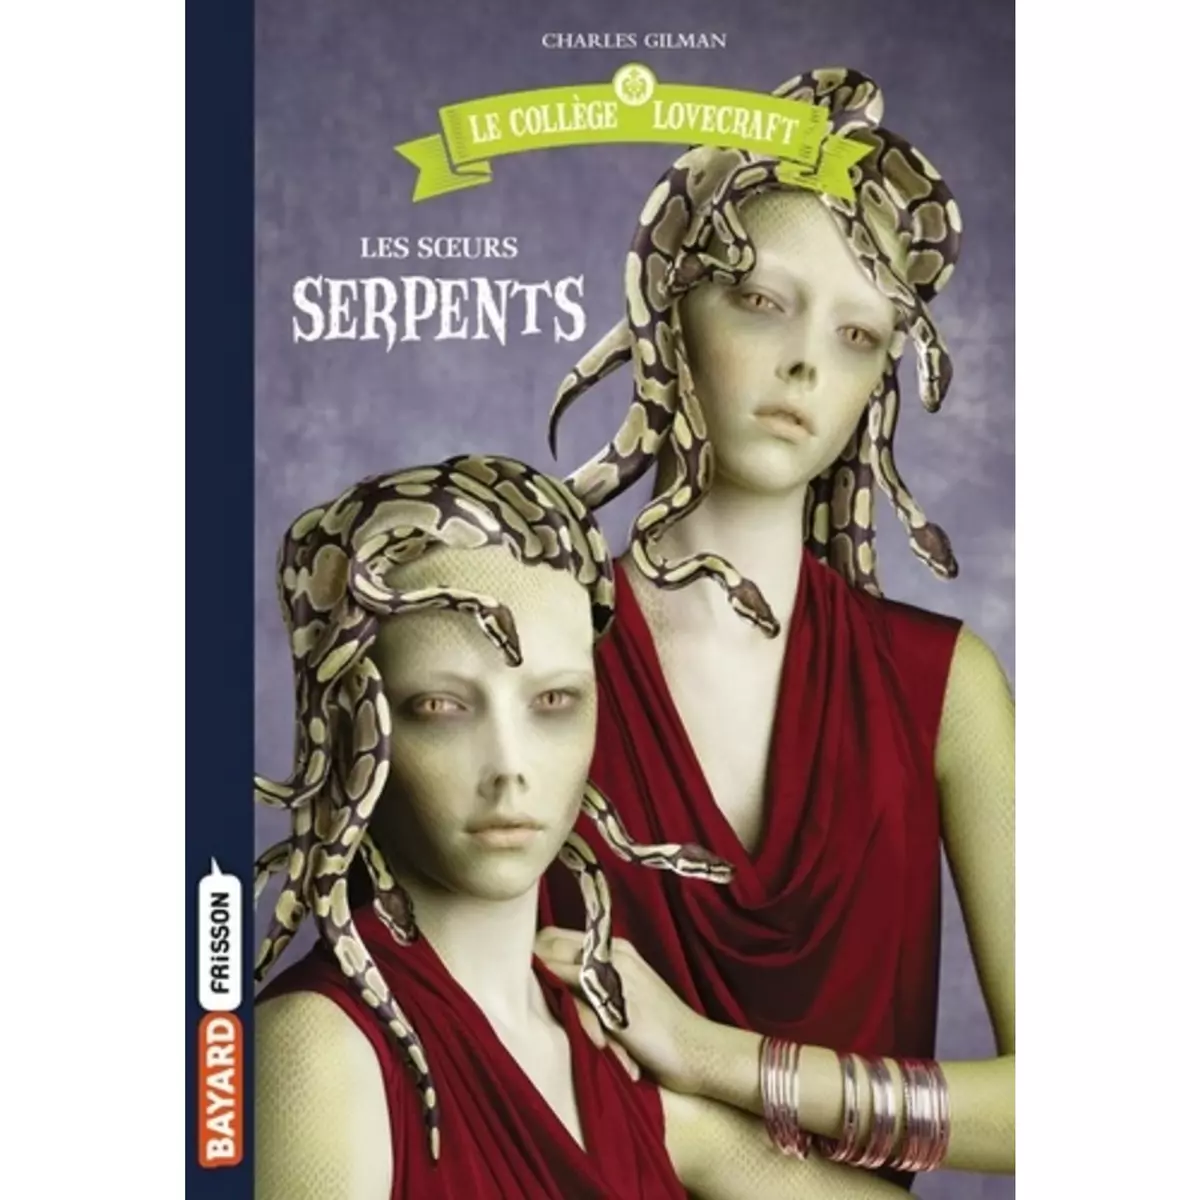  LE COLLEGE LOVECRAFT TOME 2 : LES SOEURS SERPENTS, Gilman Charles